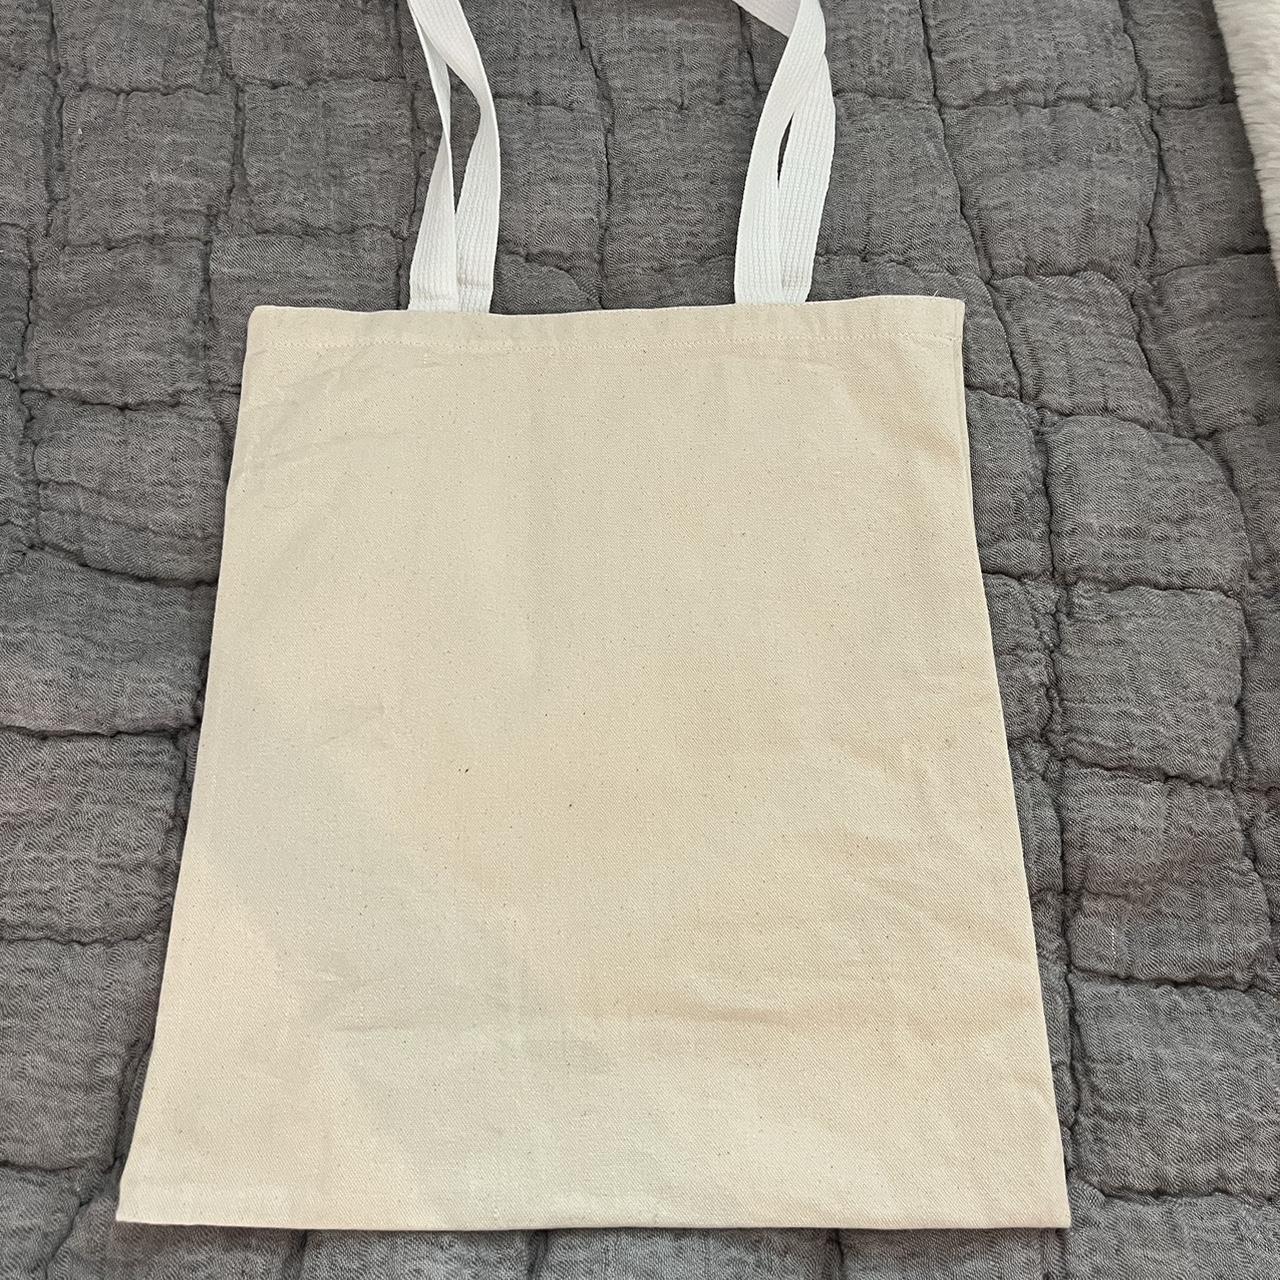 outdoor voices tote so cute for summer - Depop